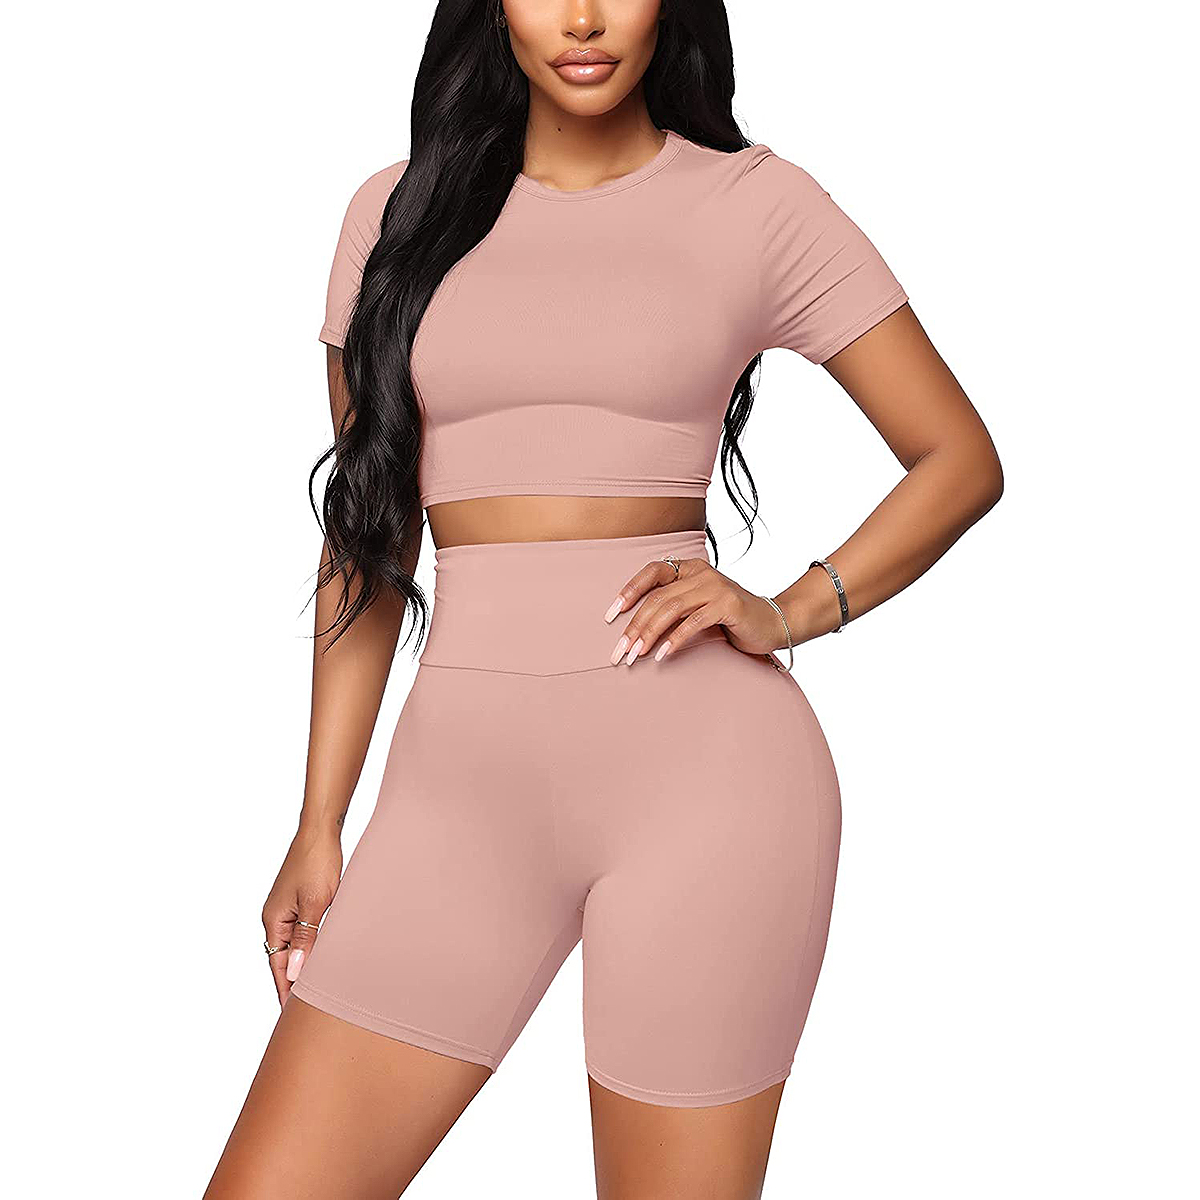 WIHOLL Two Piece Outfits for Women Summer Casual V Neck Oversized T Shirt Top Sweatsuits Biker Shorts Set 